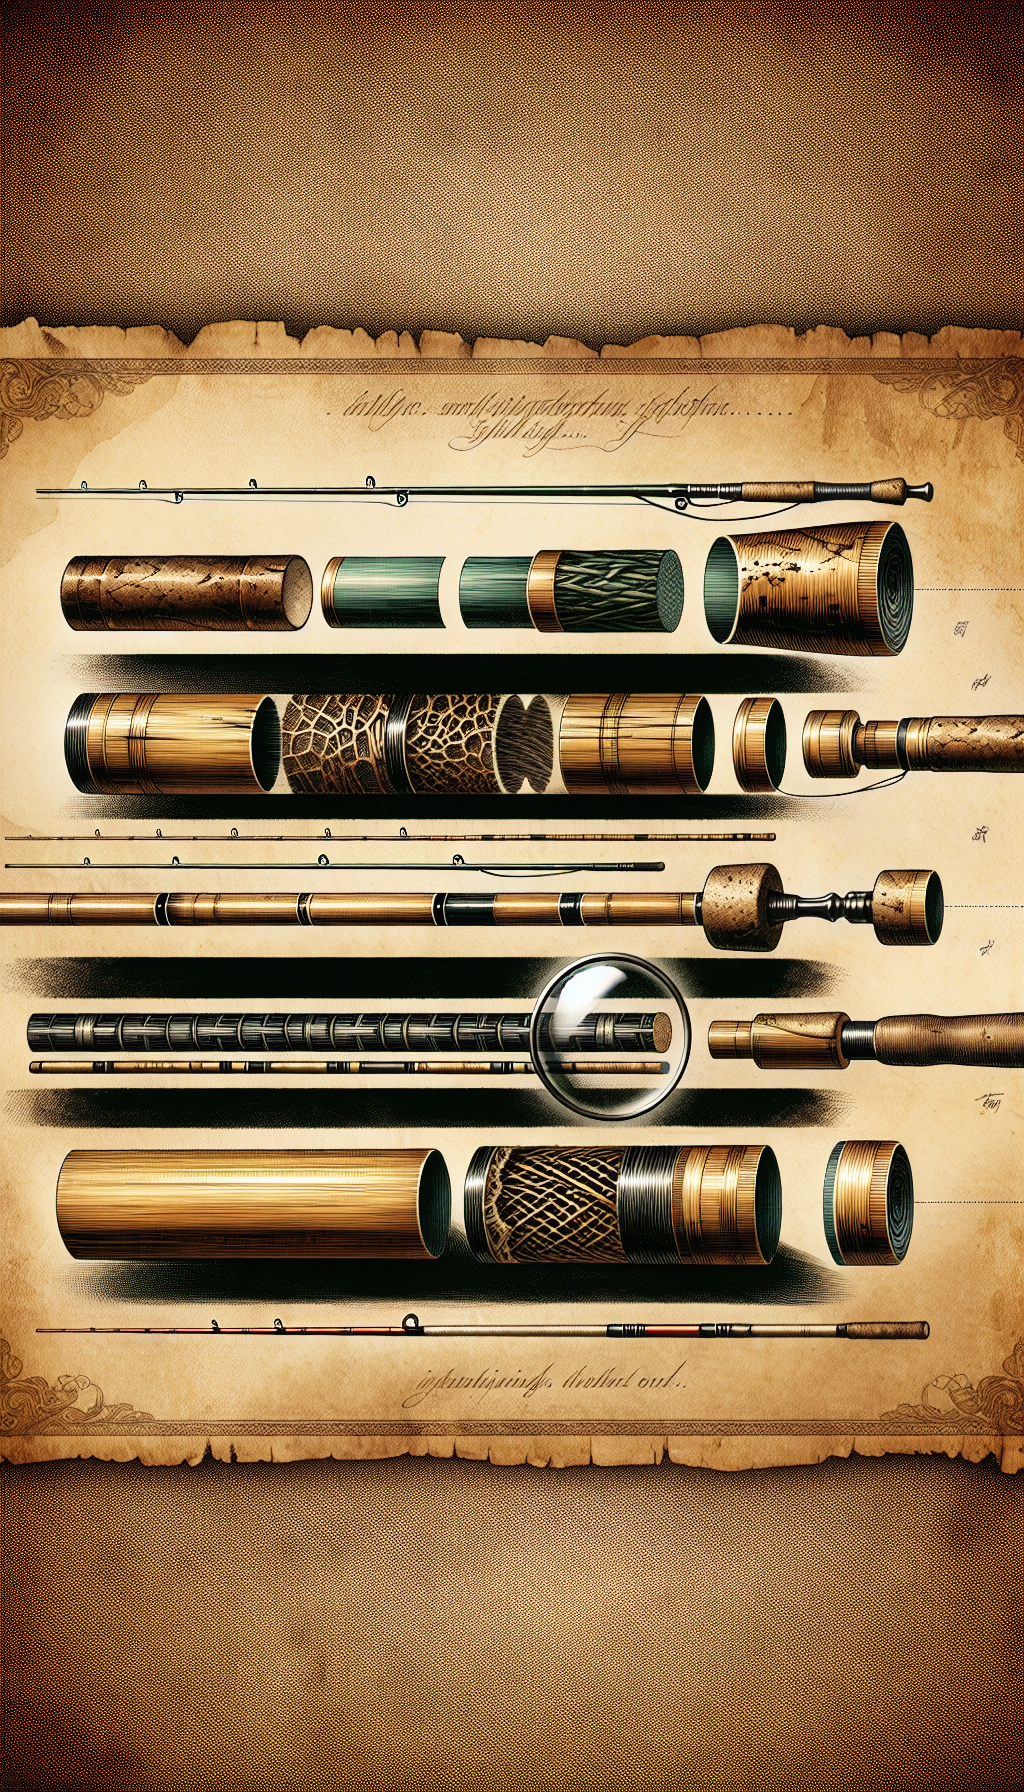 An illustrative montage of fishing rod cross-sections, with an antique parchment background. From left to right: a bronzed, textured fiberglass rod fades into a natural bamboo stick, and transitions into futuristic materials with a carbon fiber weave pattern. Engraved labels and a magnifying glass focusing on detailed old-time rod signatures weave through the image, symbolizing the quest for vintage identification.